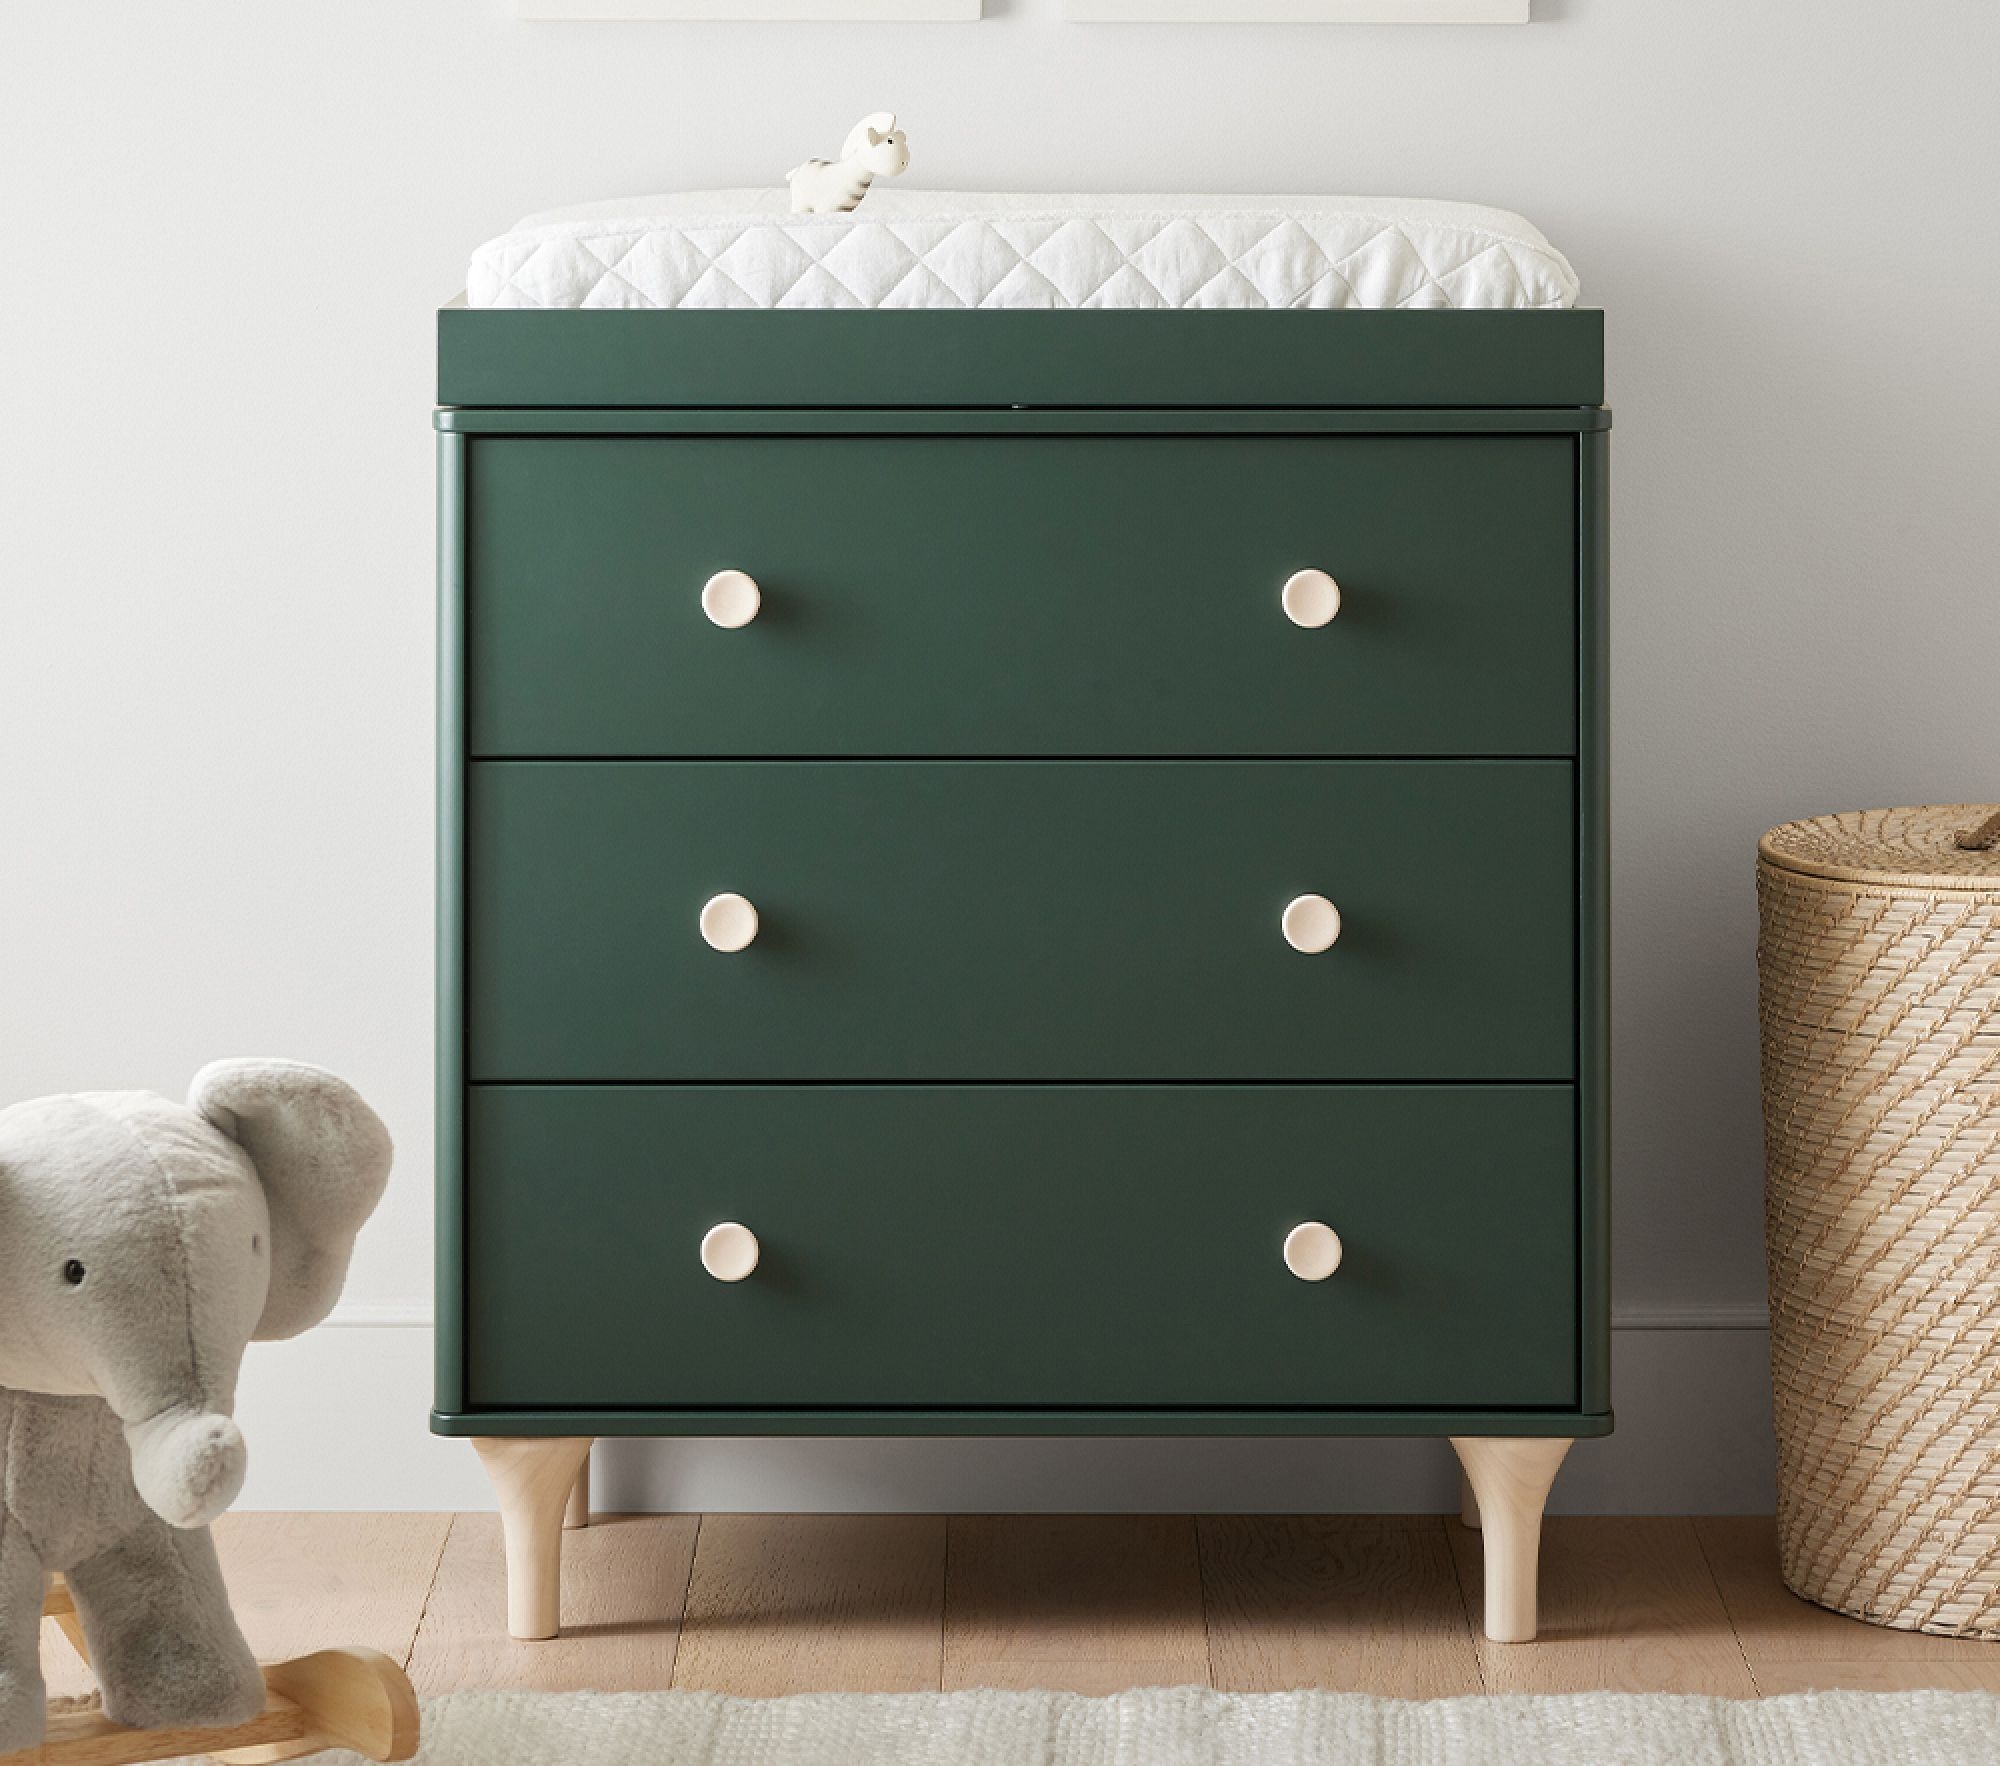 Babyletto Lolly 3-Drawer Changing Dresser, Forest Green/Washed Natural - Image 1